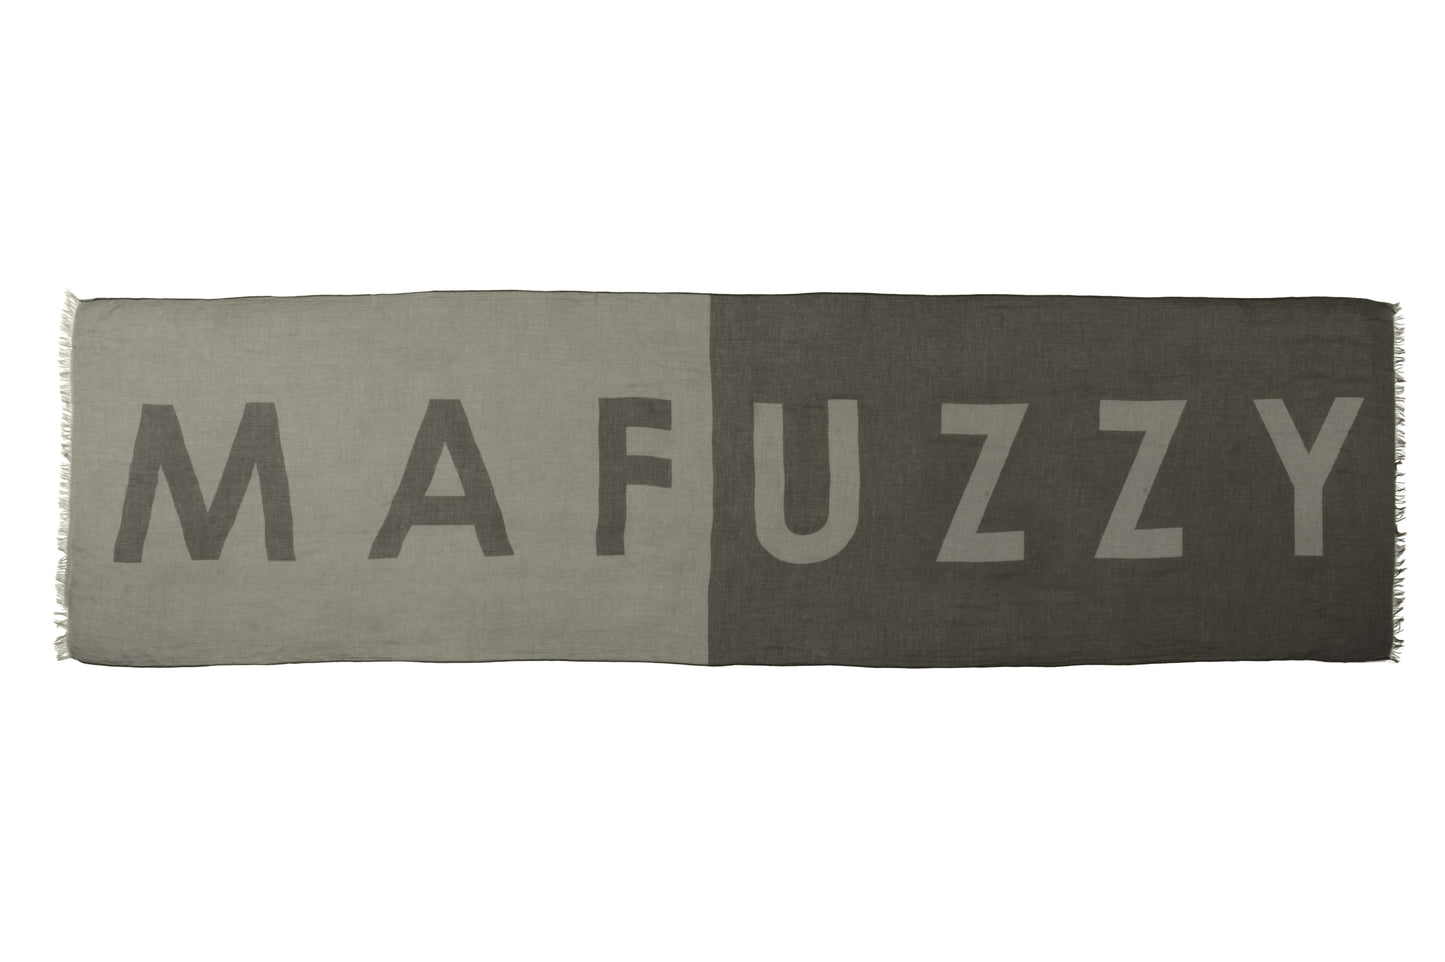 Six and a half foot long, unisex linen blend scarf with "MAFUZZY" text print in Dusty Olive